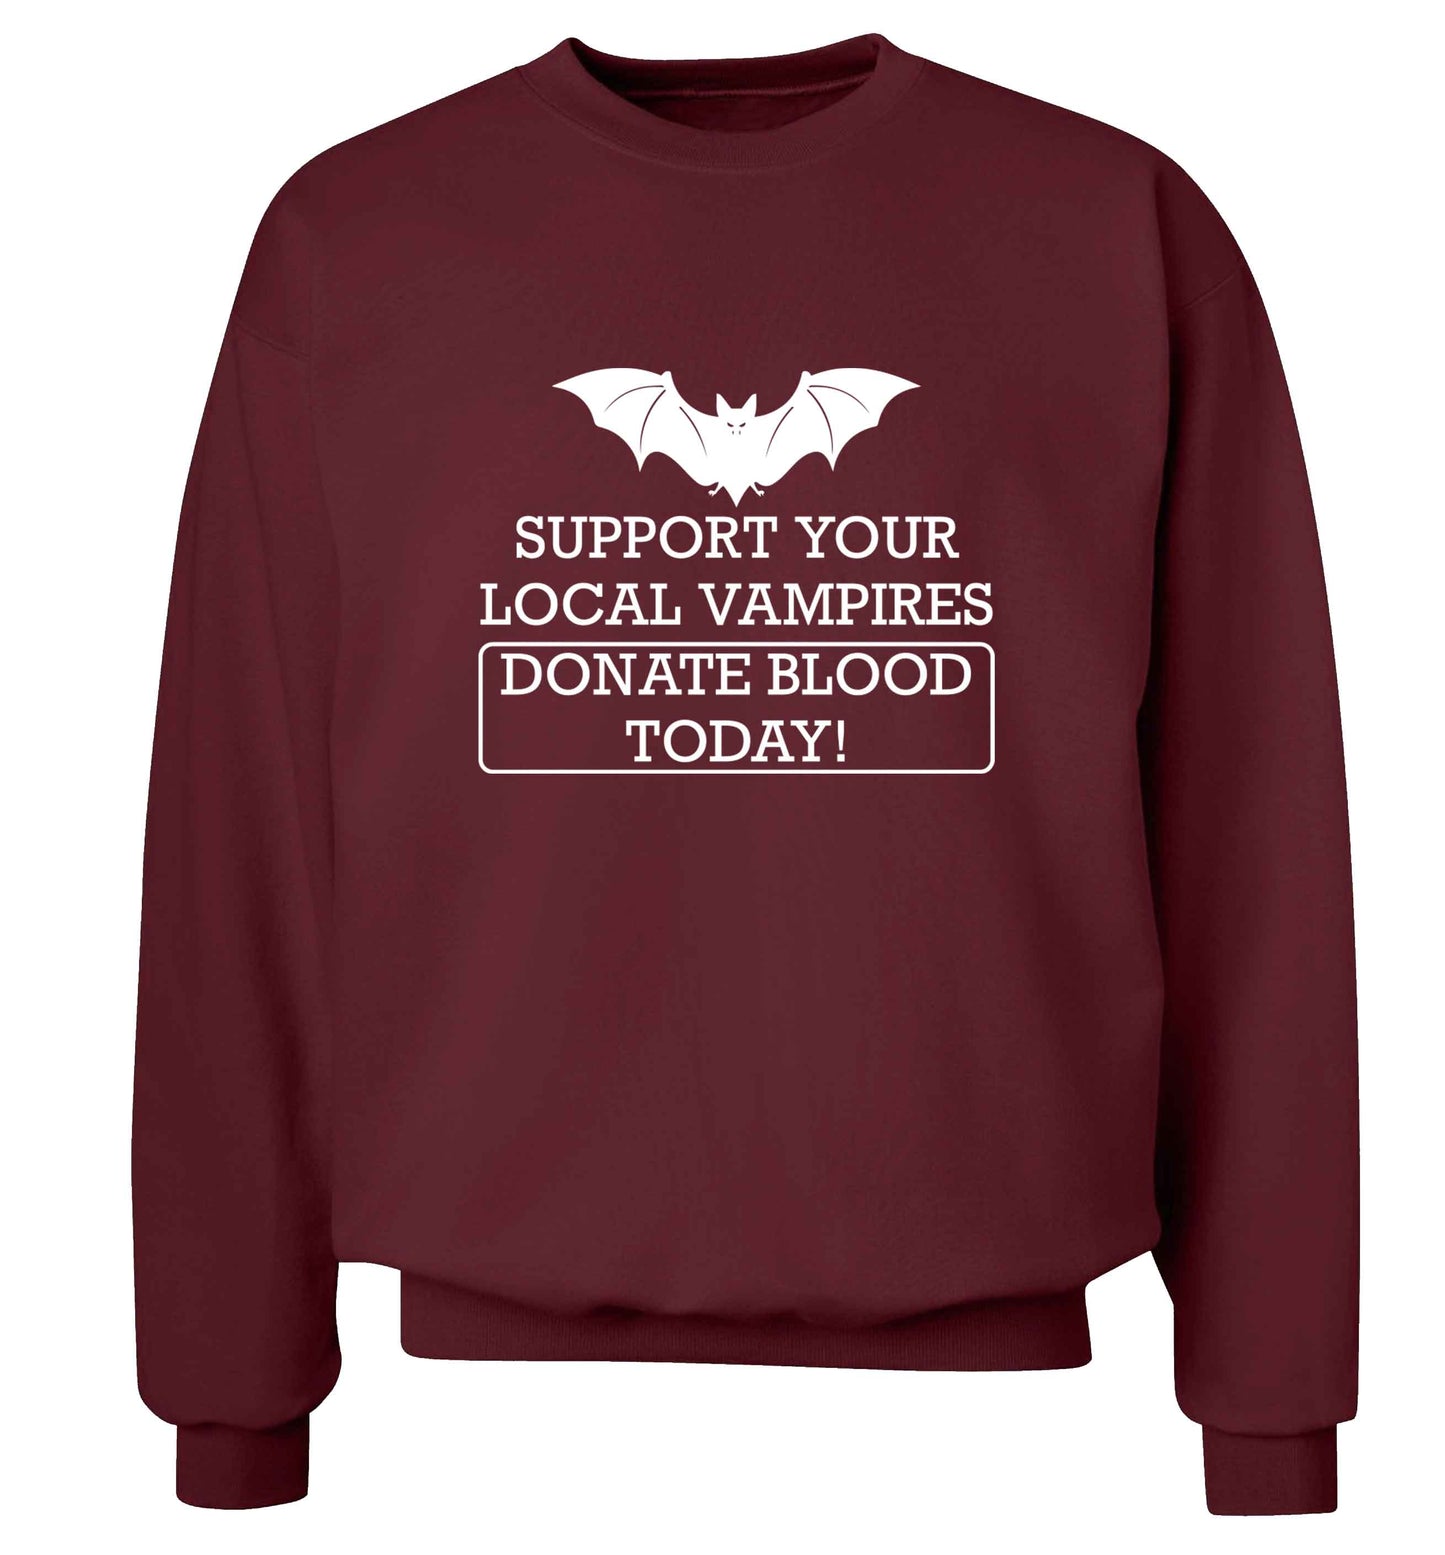 Support your local vampires donate blood today! adult's unisex maroon sweater 2XL